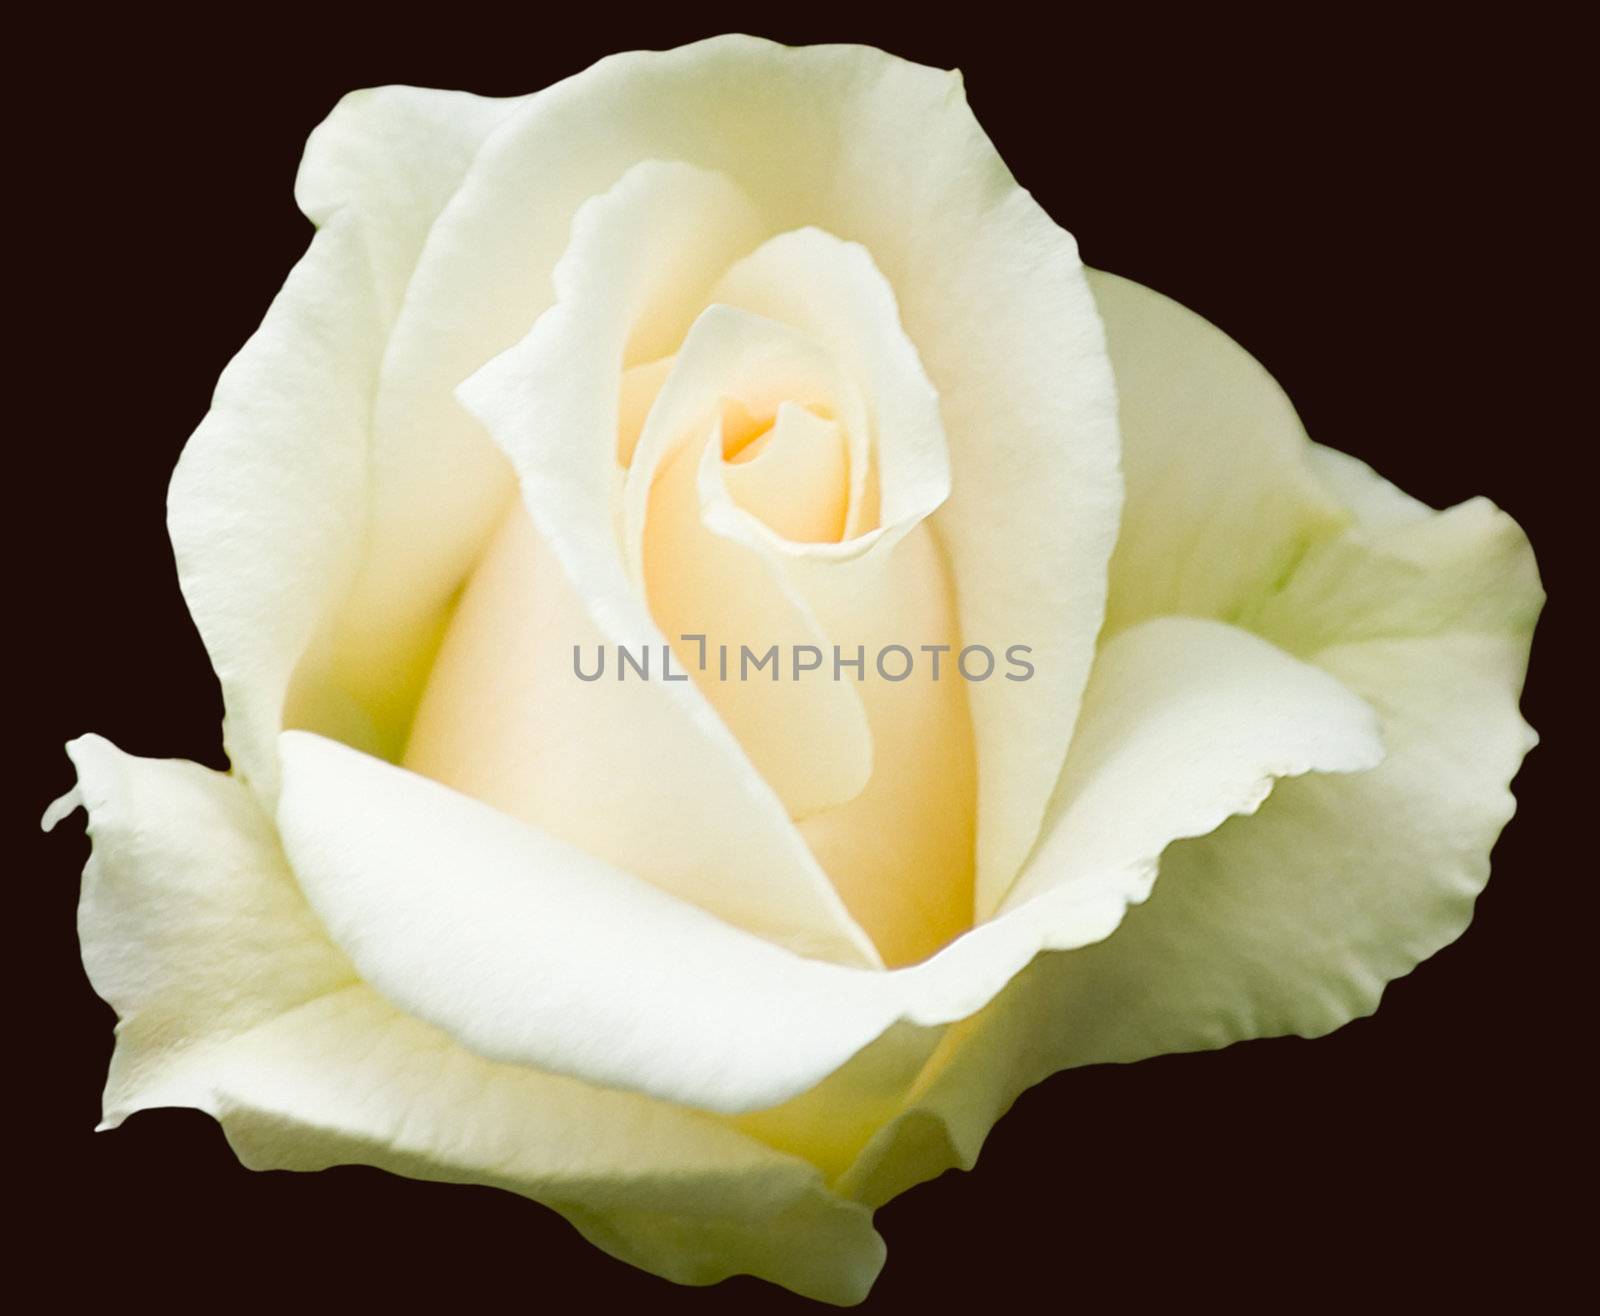 Hybrid Tea rose "Pascali" (clipping path included)